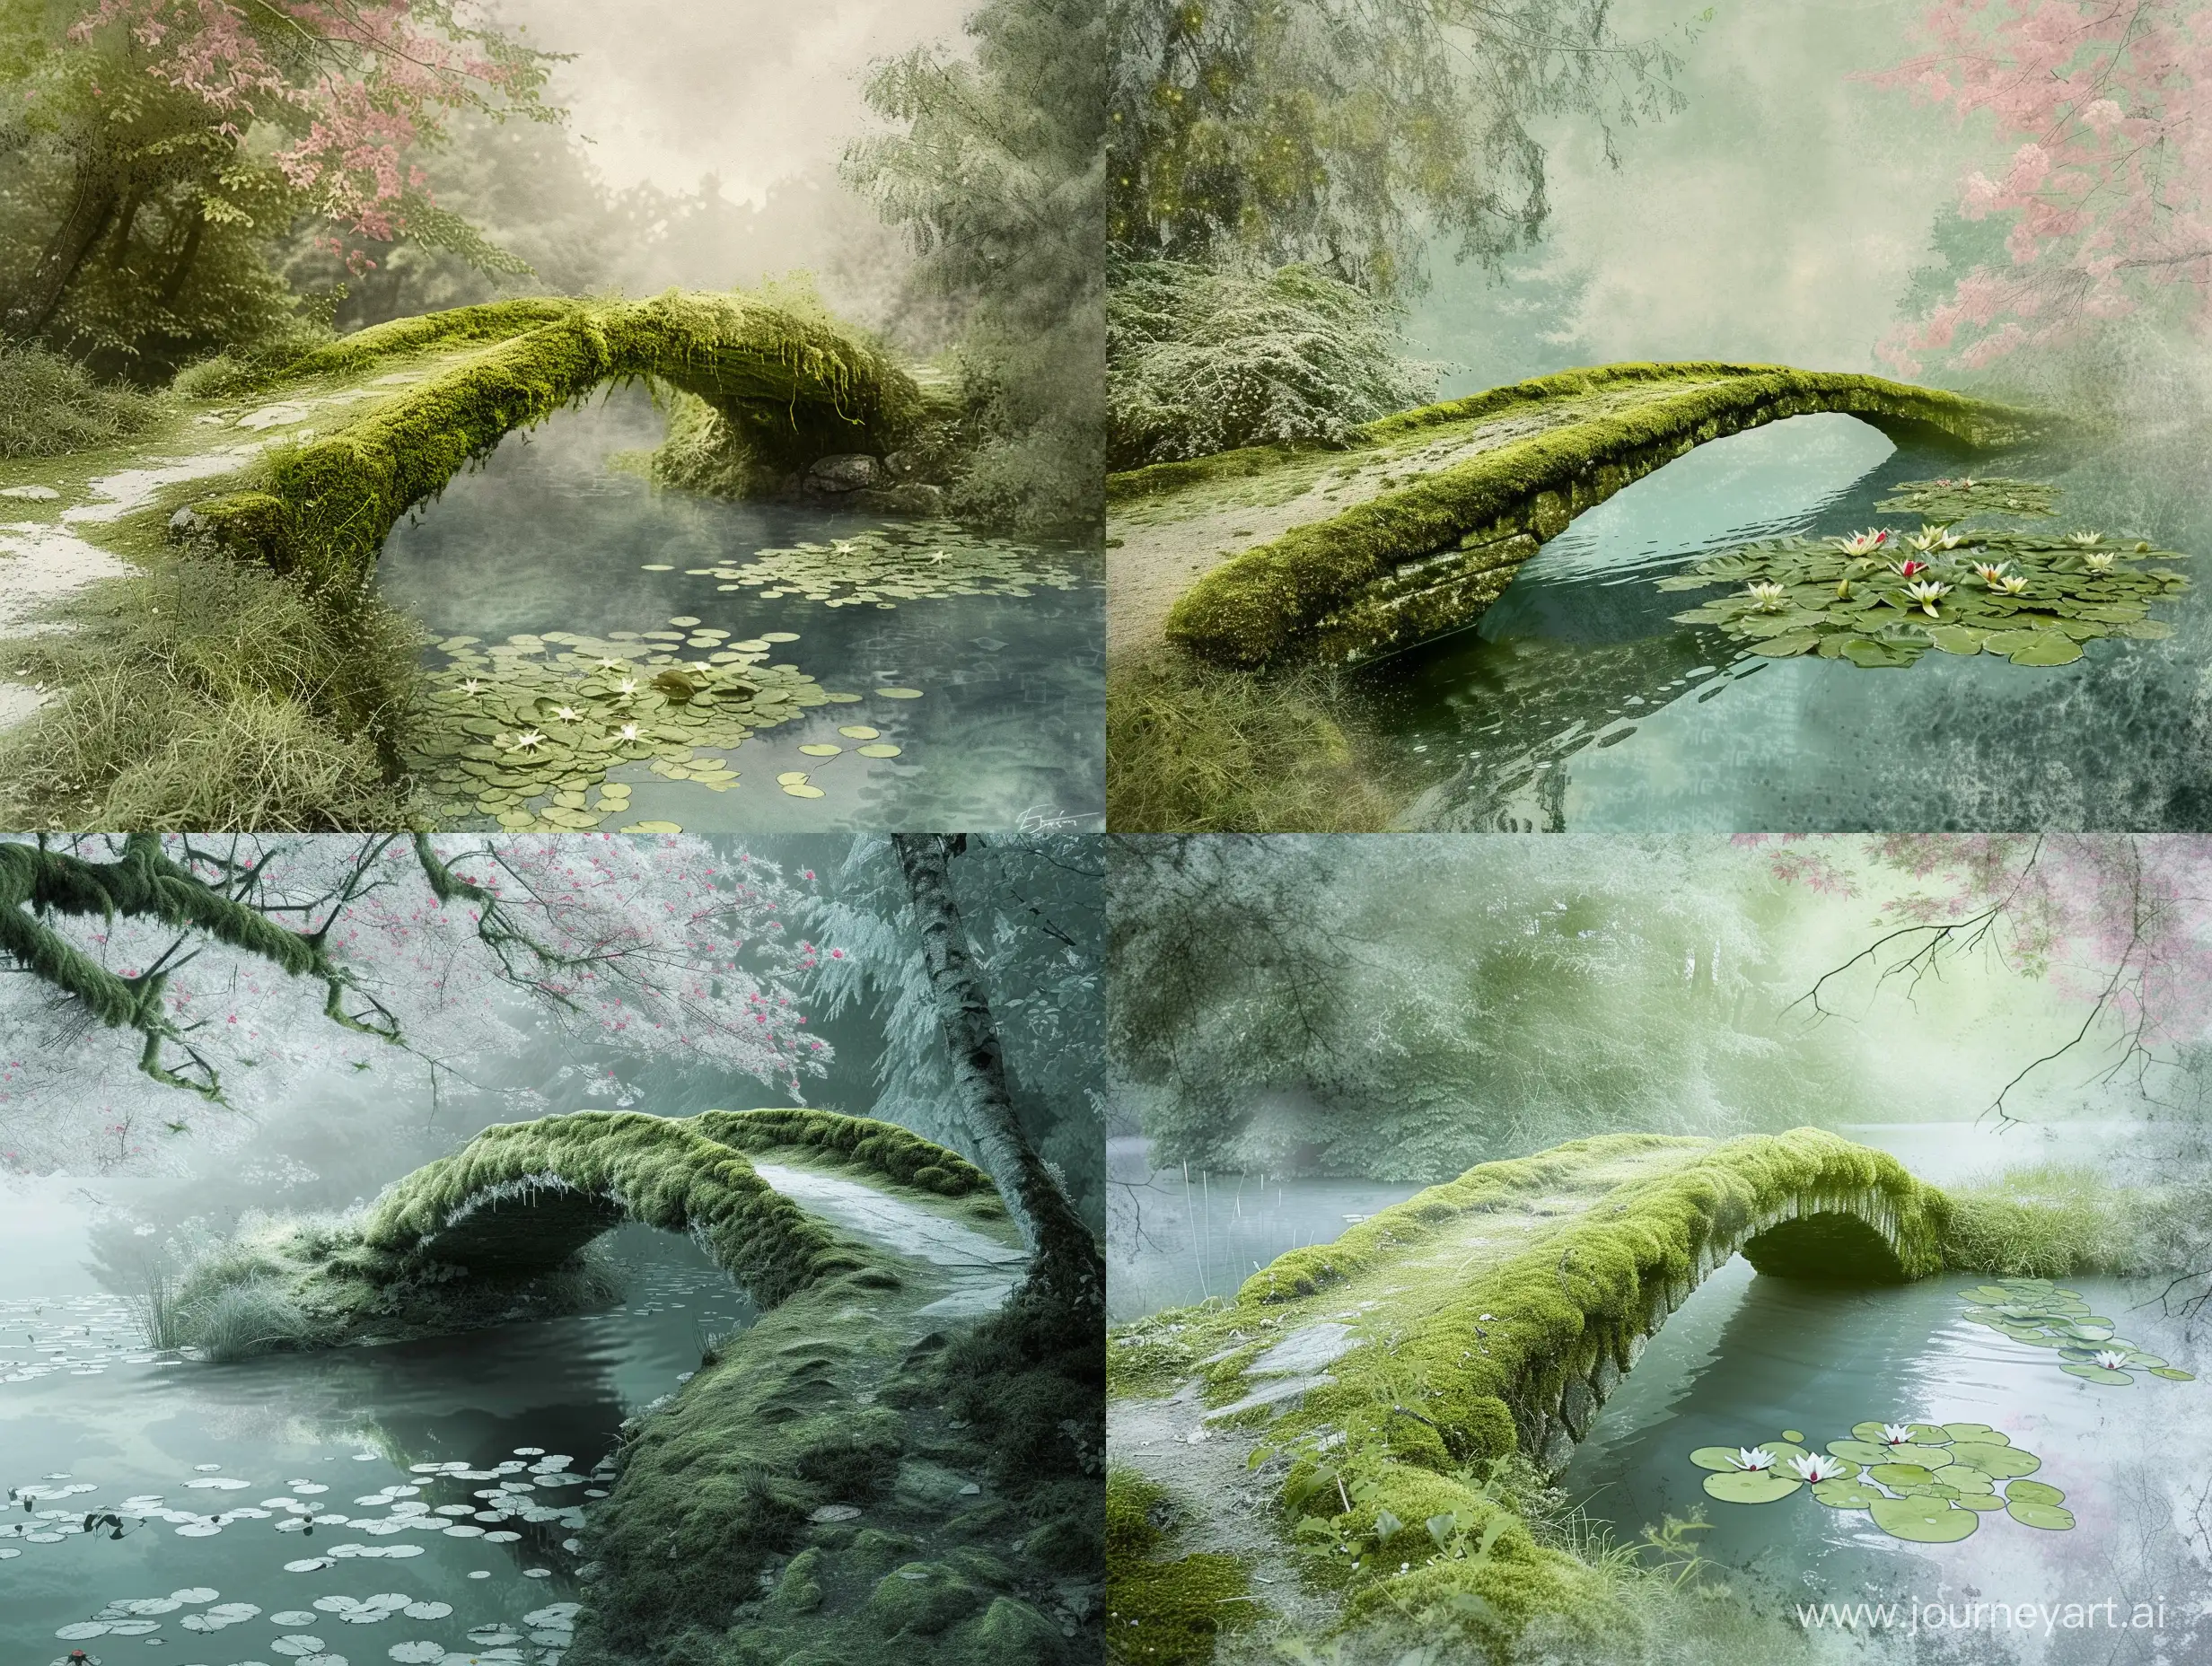 mossy bridge over a calm river with water lilies, side view, path, forest, in the style of an old illustration in green, blue, pink and white tones mossy bridge over a calm river with water lilies, side view, path, forest, in the style of an old illustration in green, blue, pink and white tones